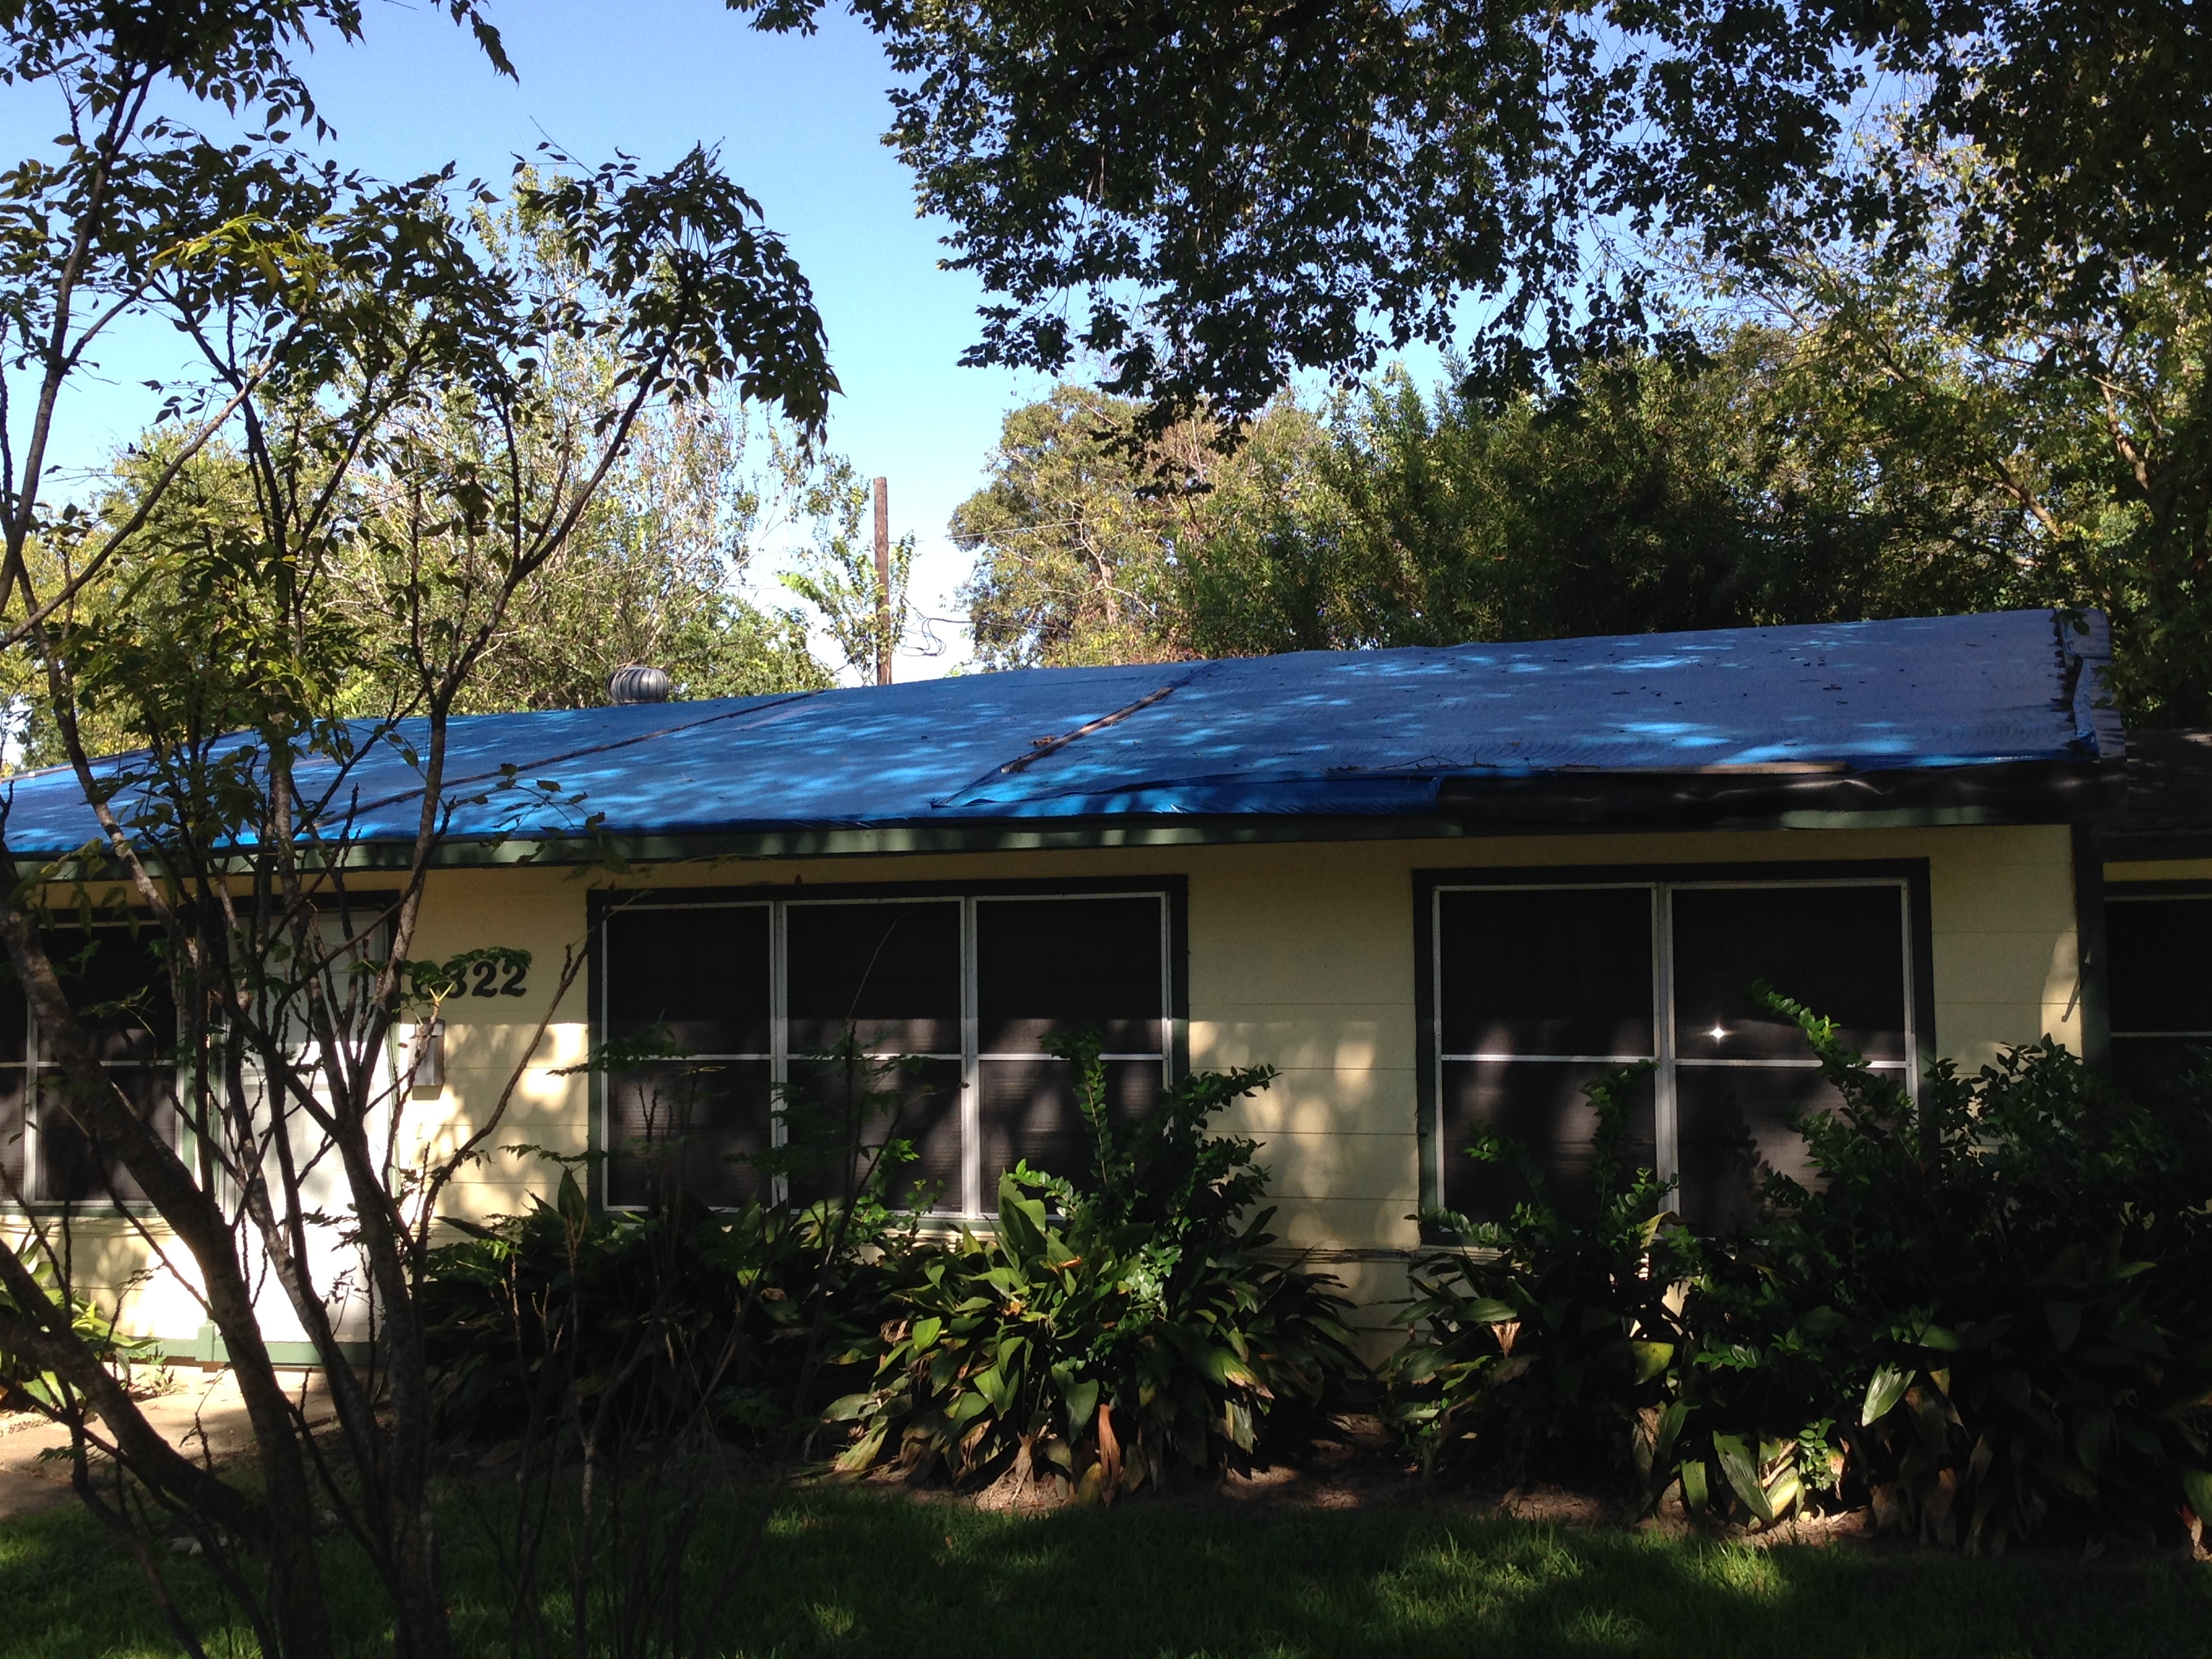 Tarps such as the one this photo shows covered the roof of Ms. Huff's home for eight years.